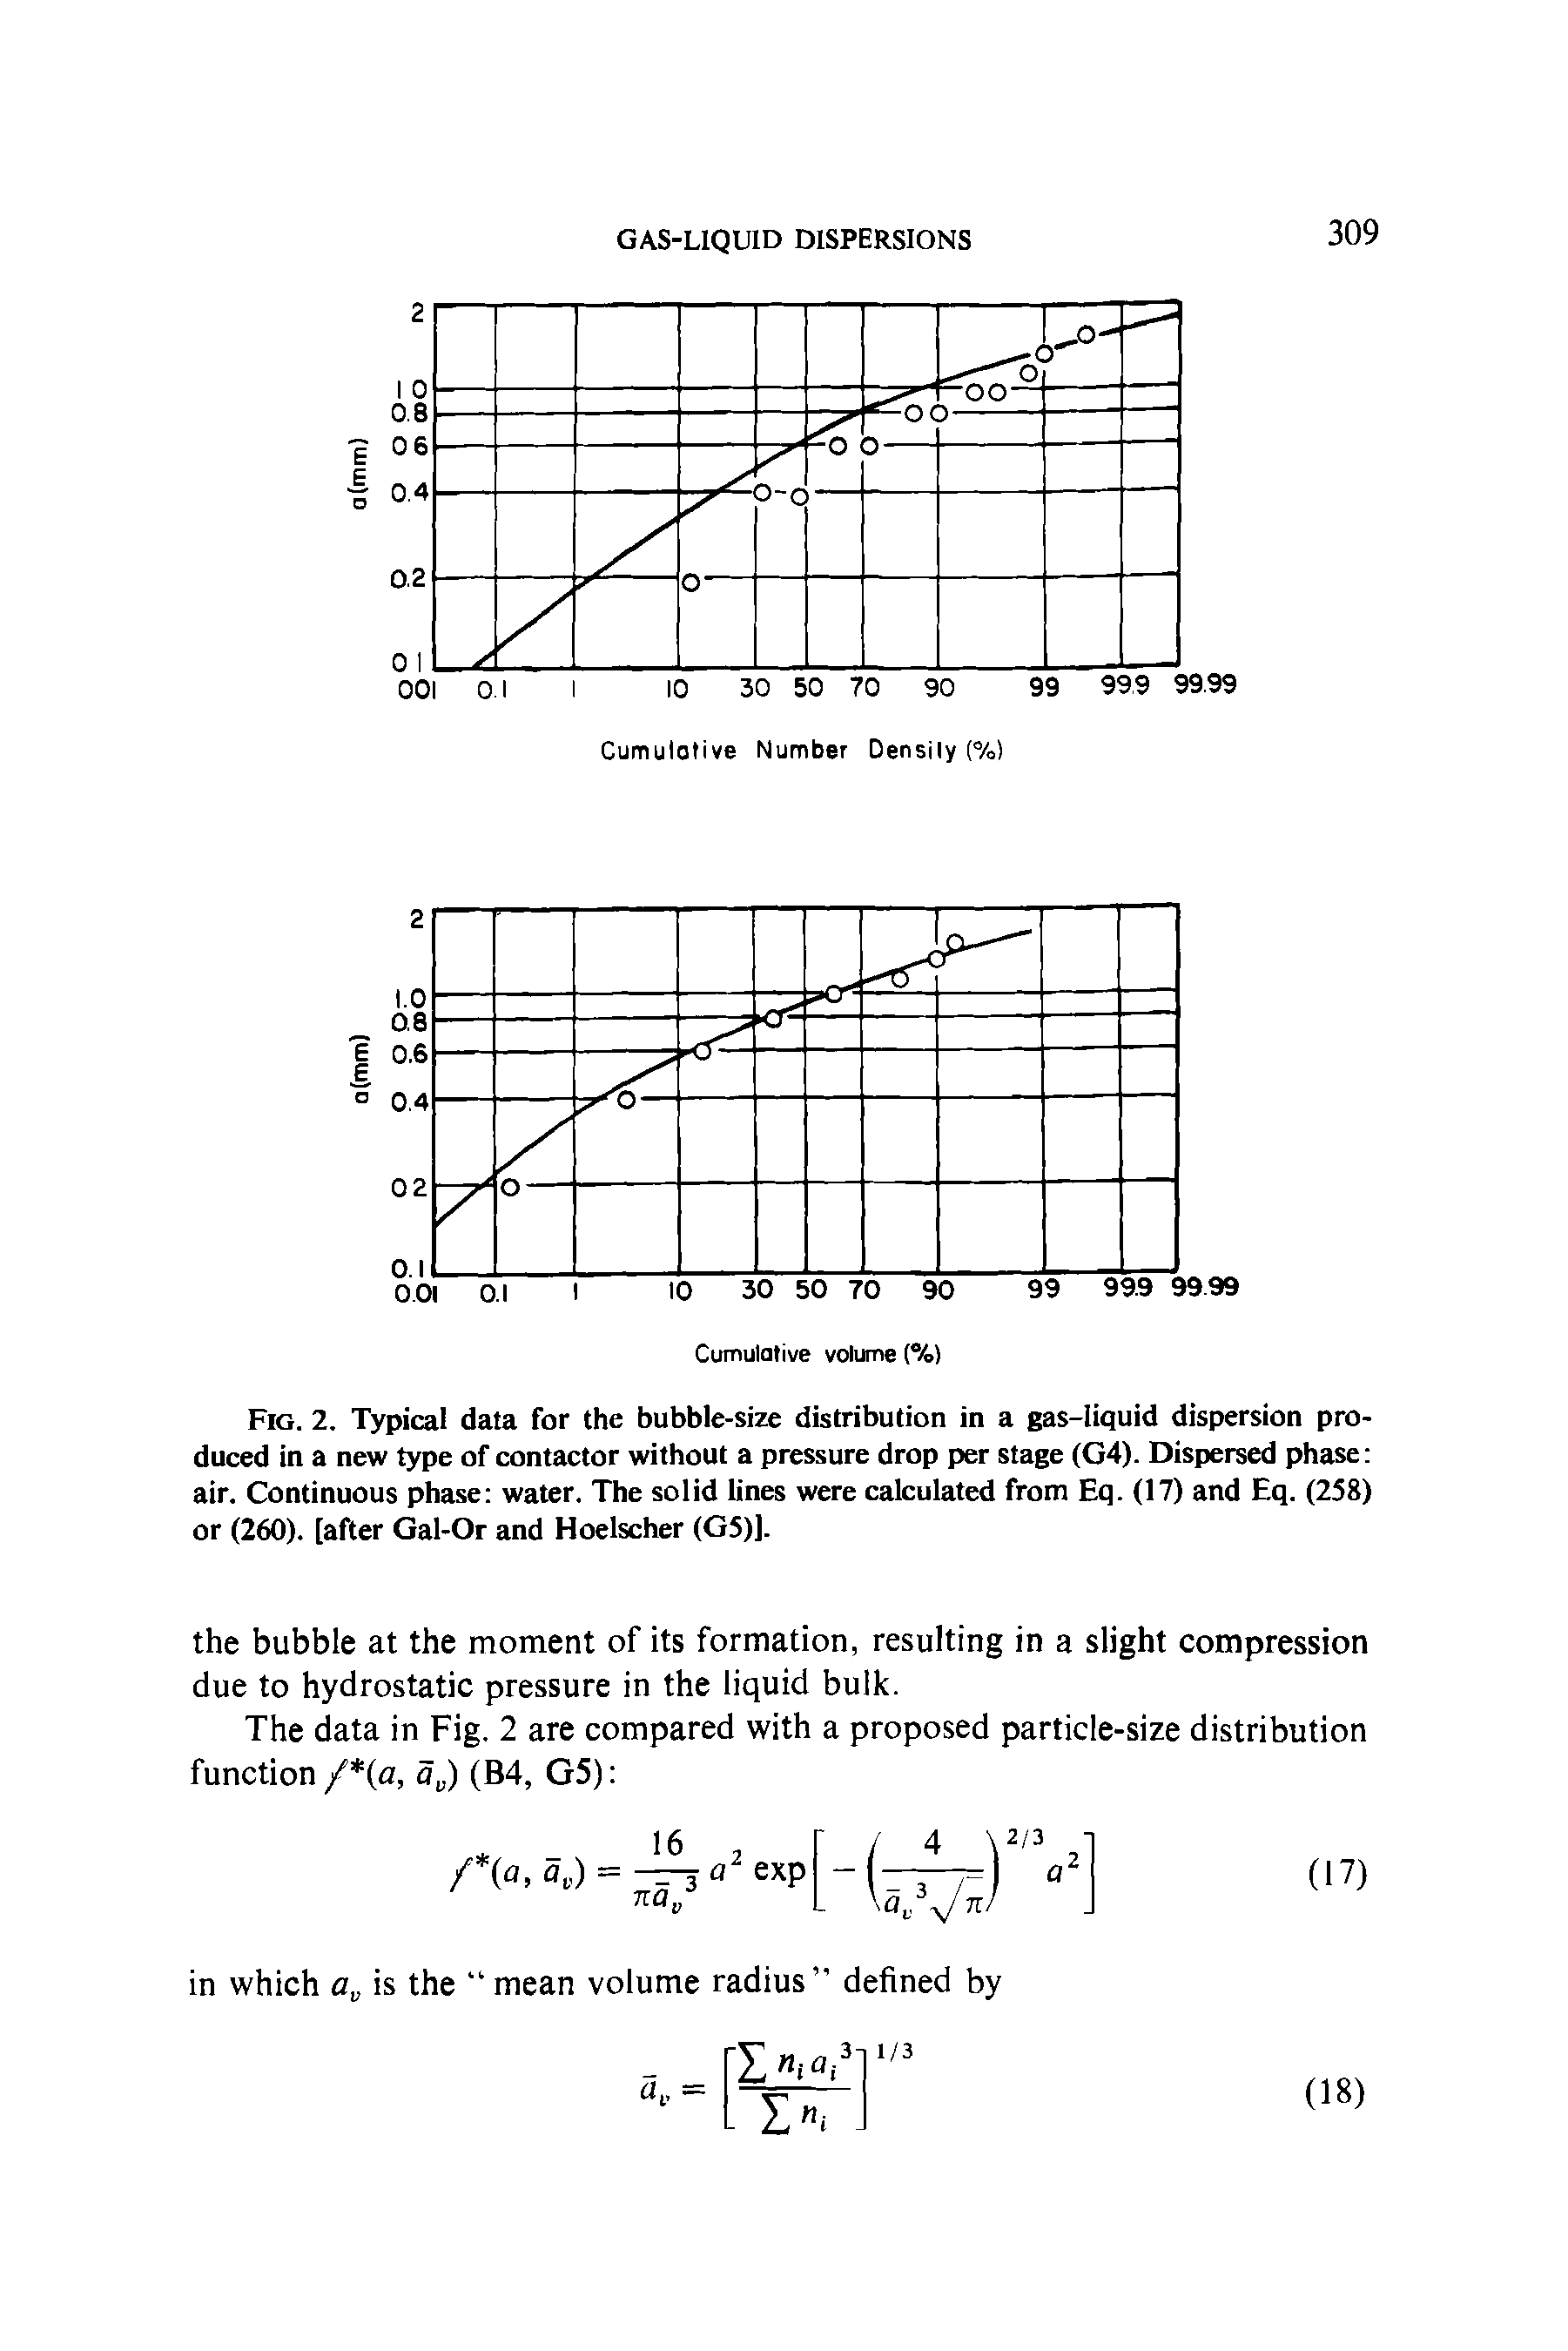 Fig. 2. Typical data for the bubble-size distribution in a gas-liquid dispersion produced in a new type of contactor without a pressure drop per stage (G4). Dispersed phase air. Continuous phase water. The solid lines were calculated from Eq. (17) and Eq. (258) or (260). [after Gal-Or and Hoelscher (G5)].